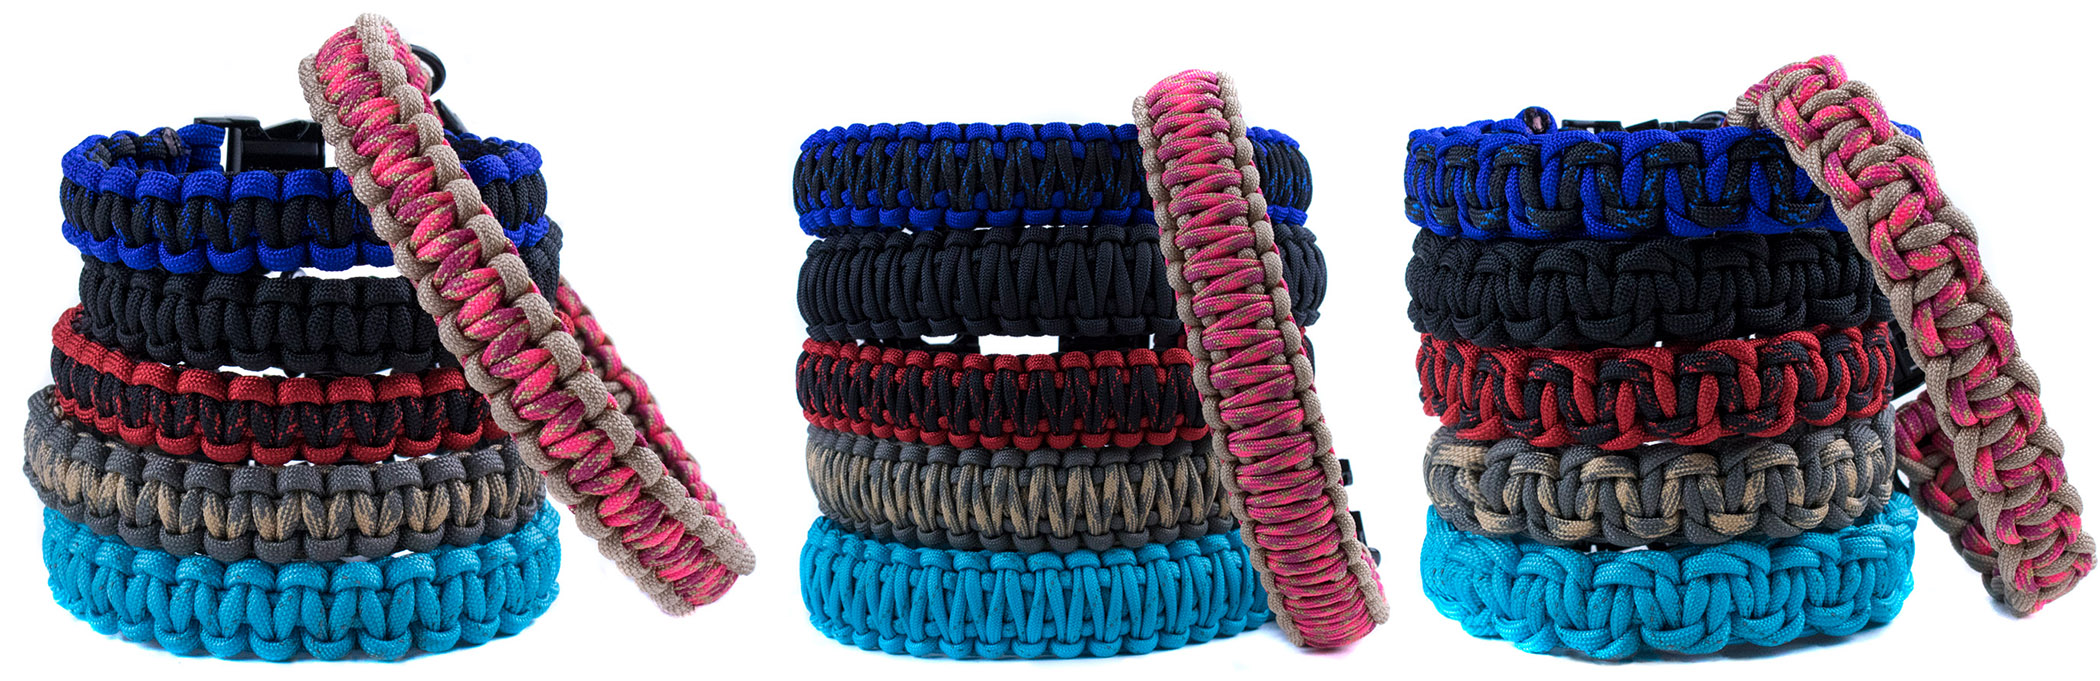 Finished Paracord Dog Collars